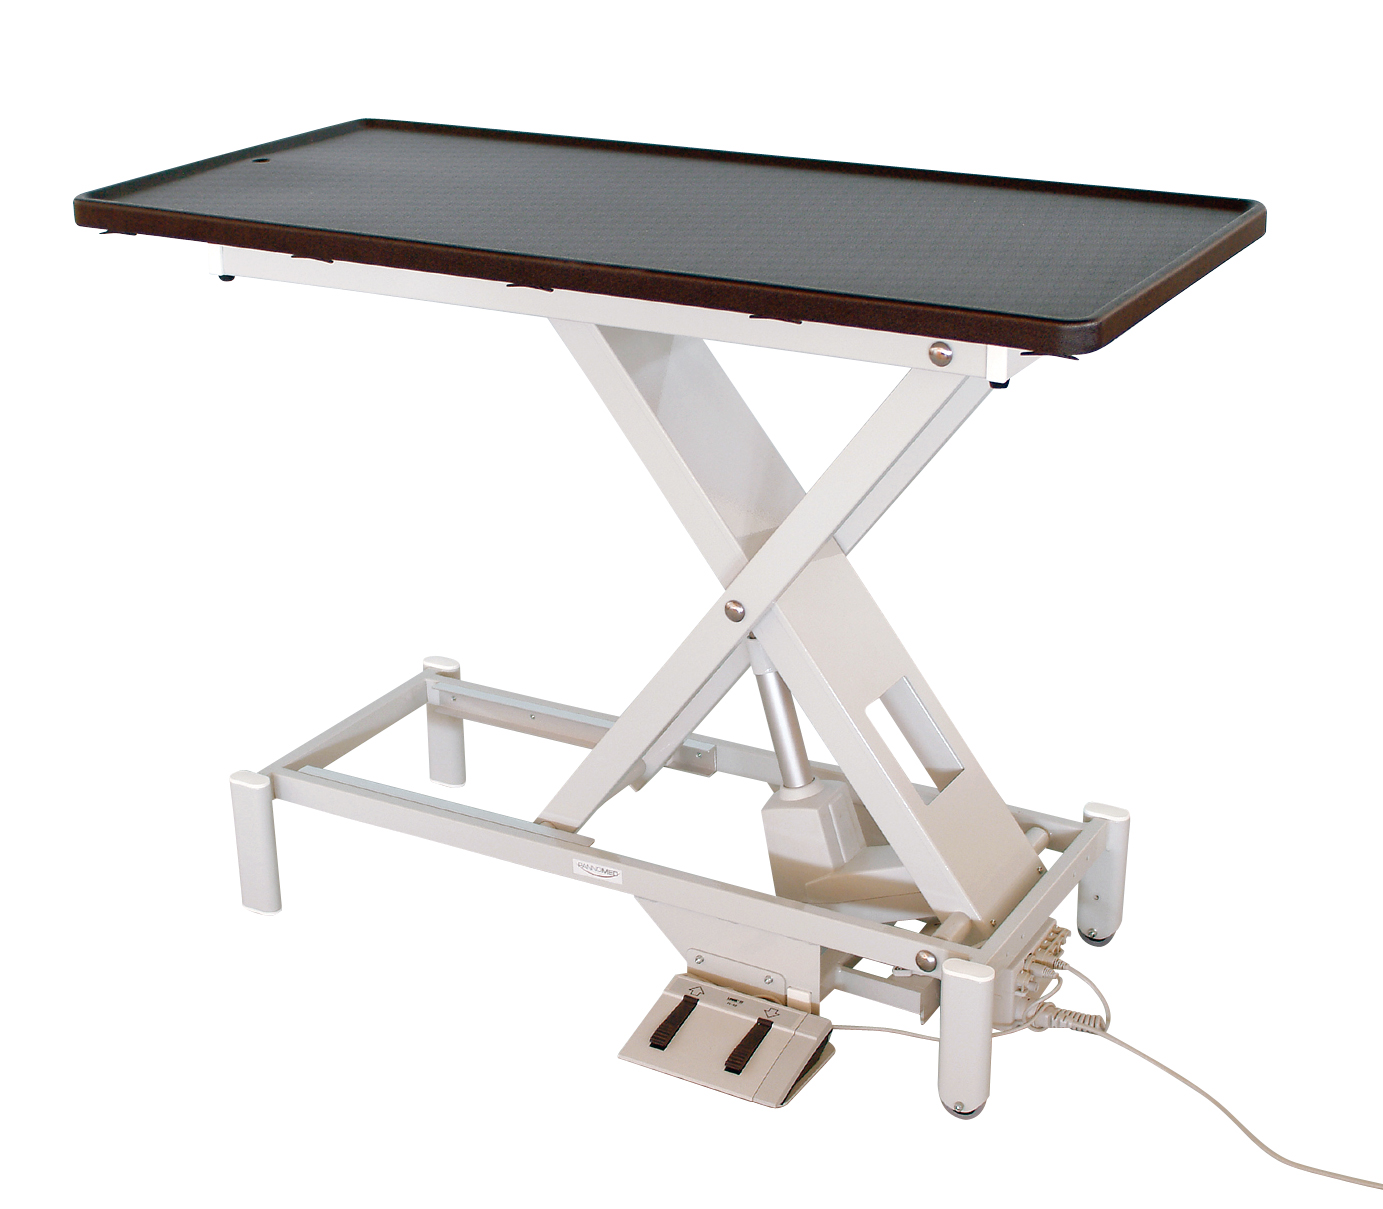 Vet Lift Table, electric with synthetic table top, 2 small castors